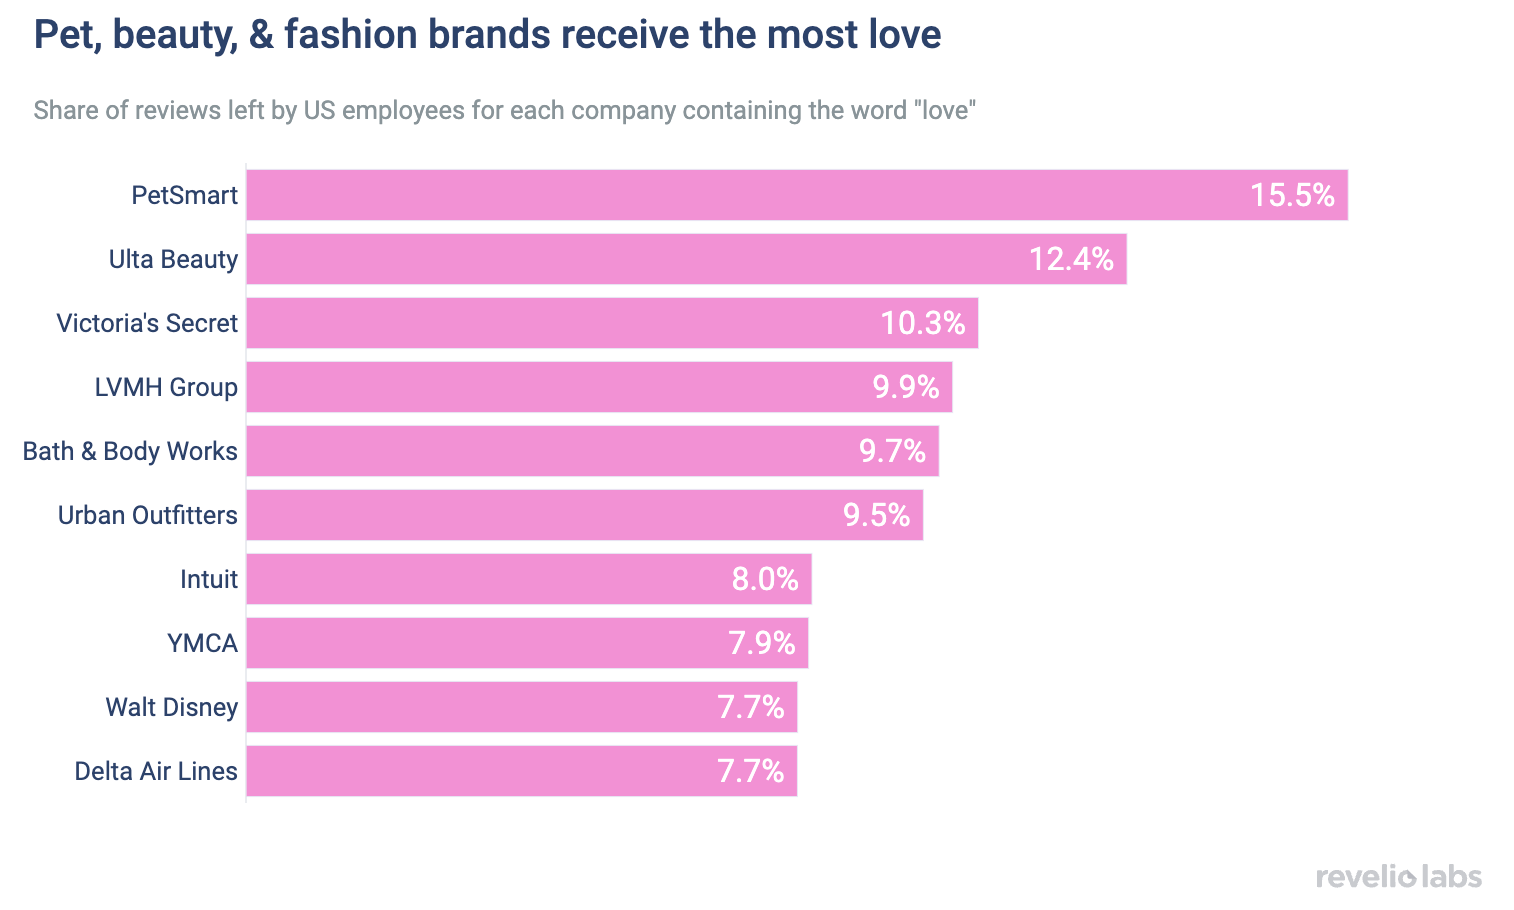 Pet and beauty supply stores receive the most love from employees